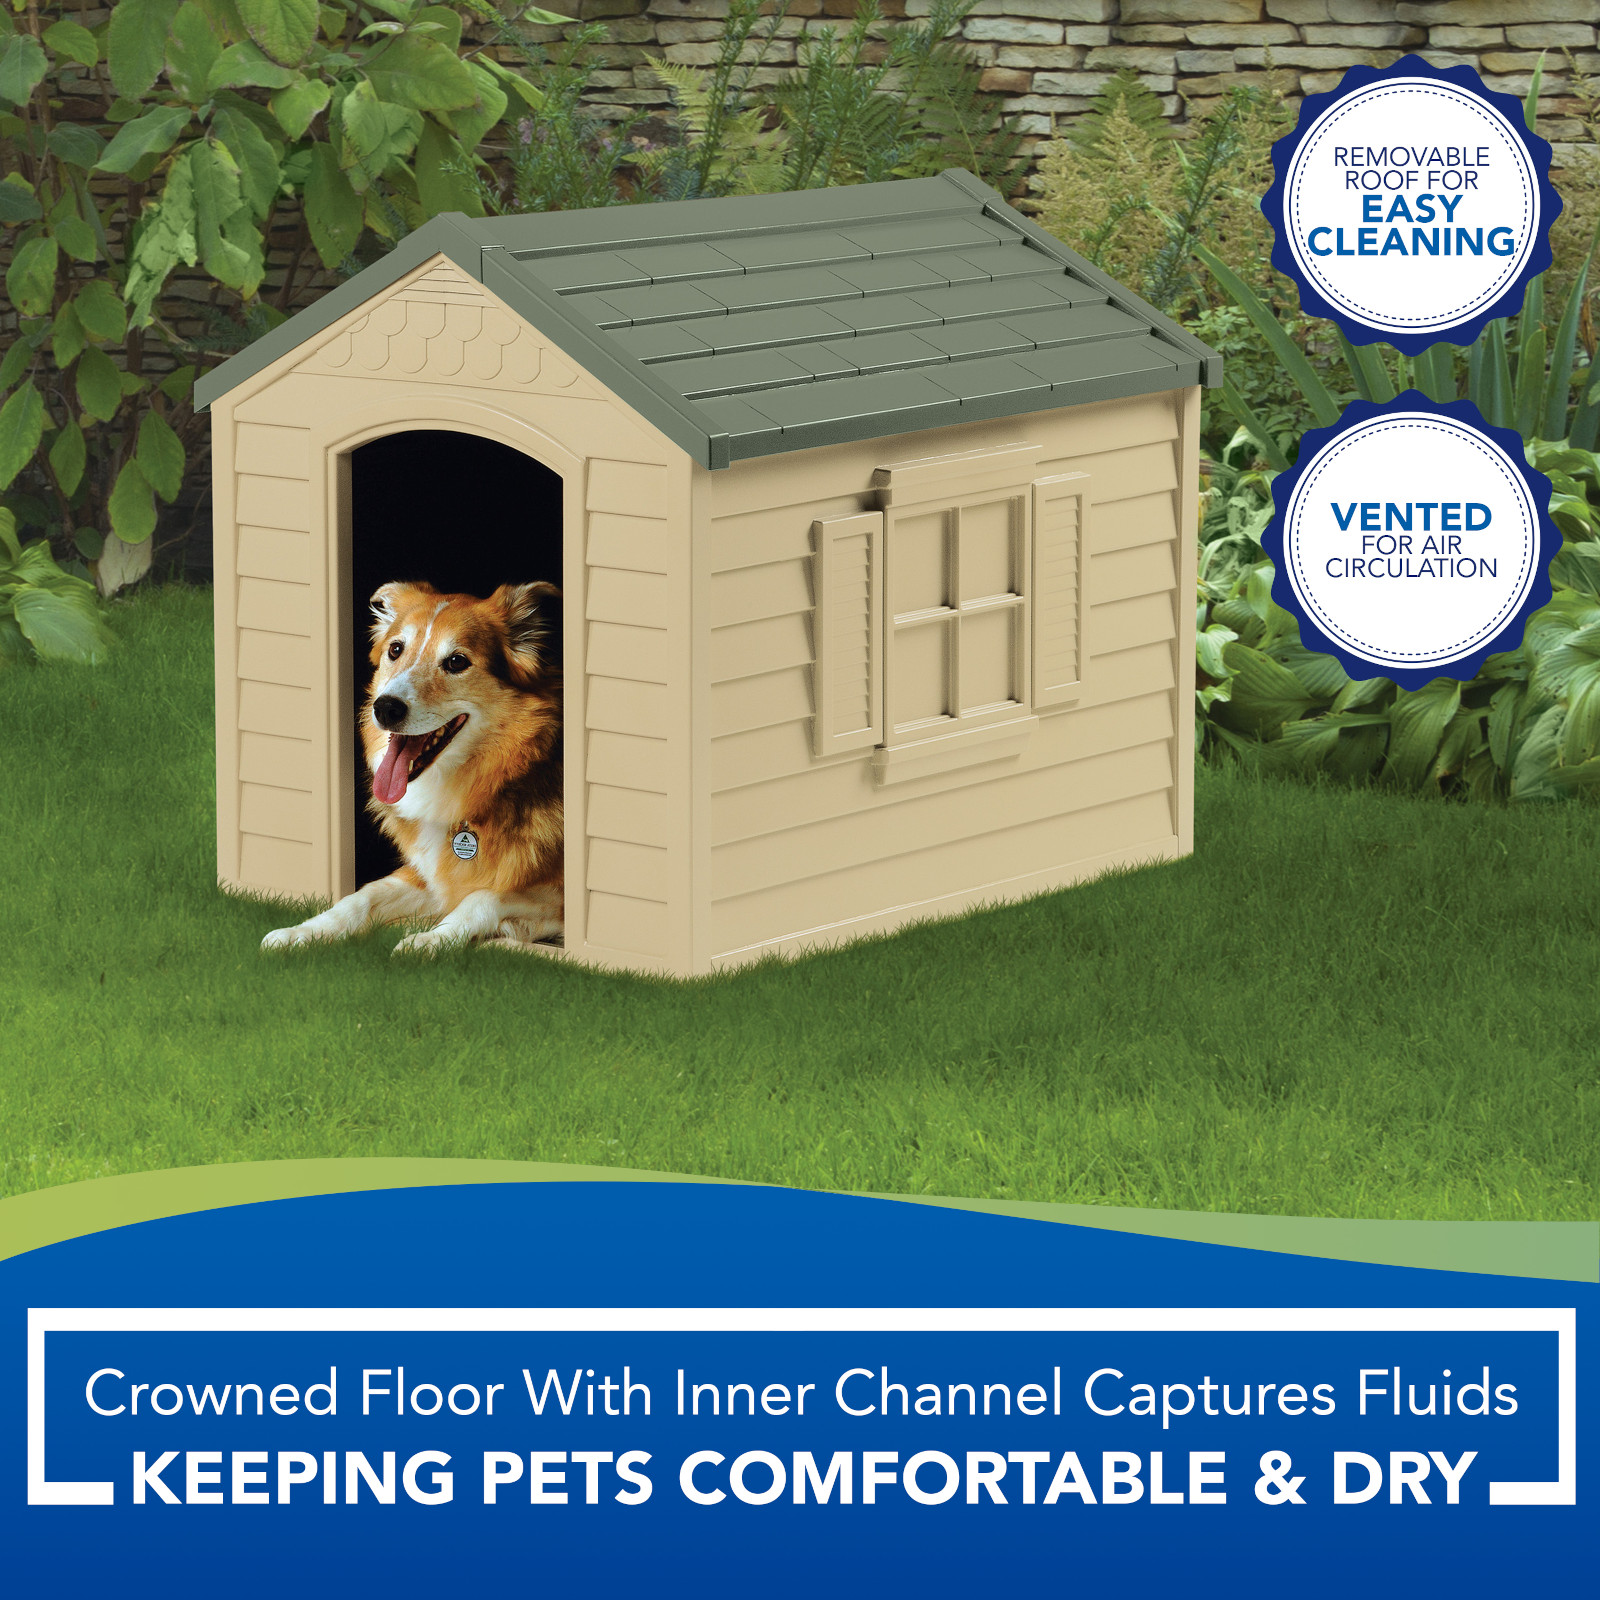 Suncast DH250 Durable Resin Snap Together Dog House with Removable Roof, Brown, Small/Medium Dogs - image 4 of 7